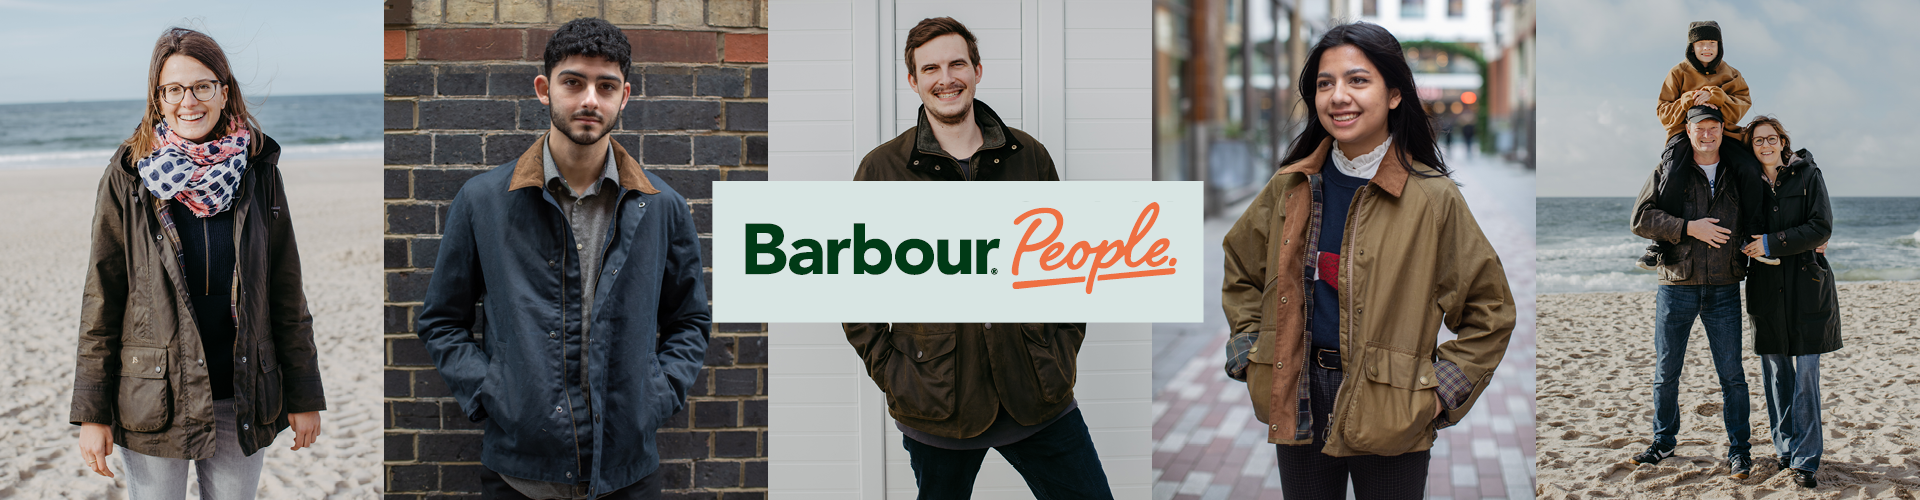 Barbour People Events: Where to Find Us